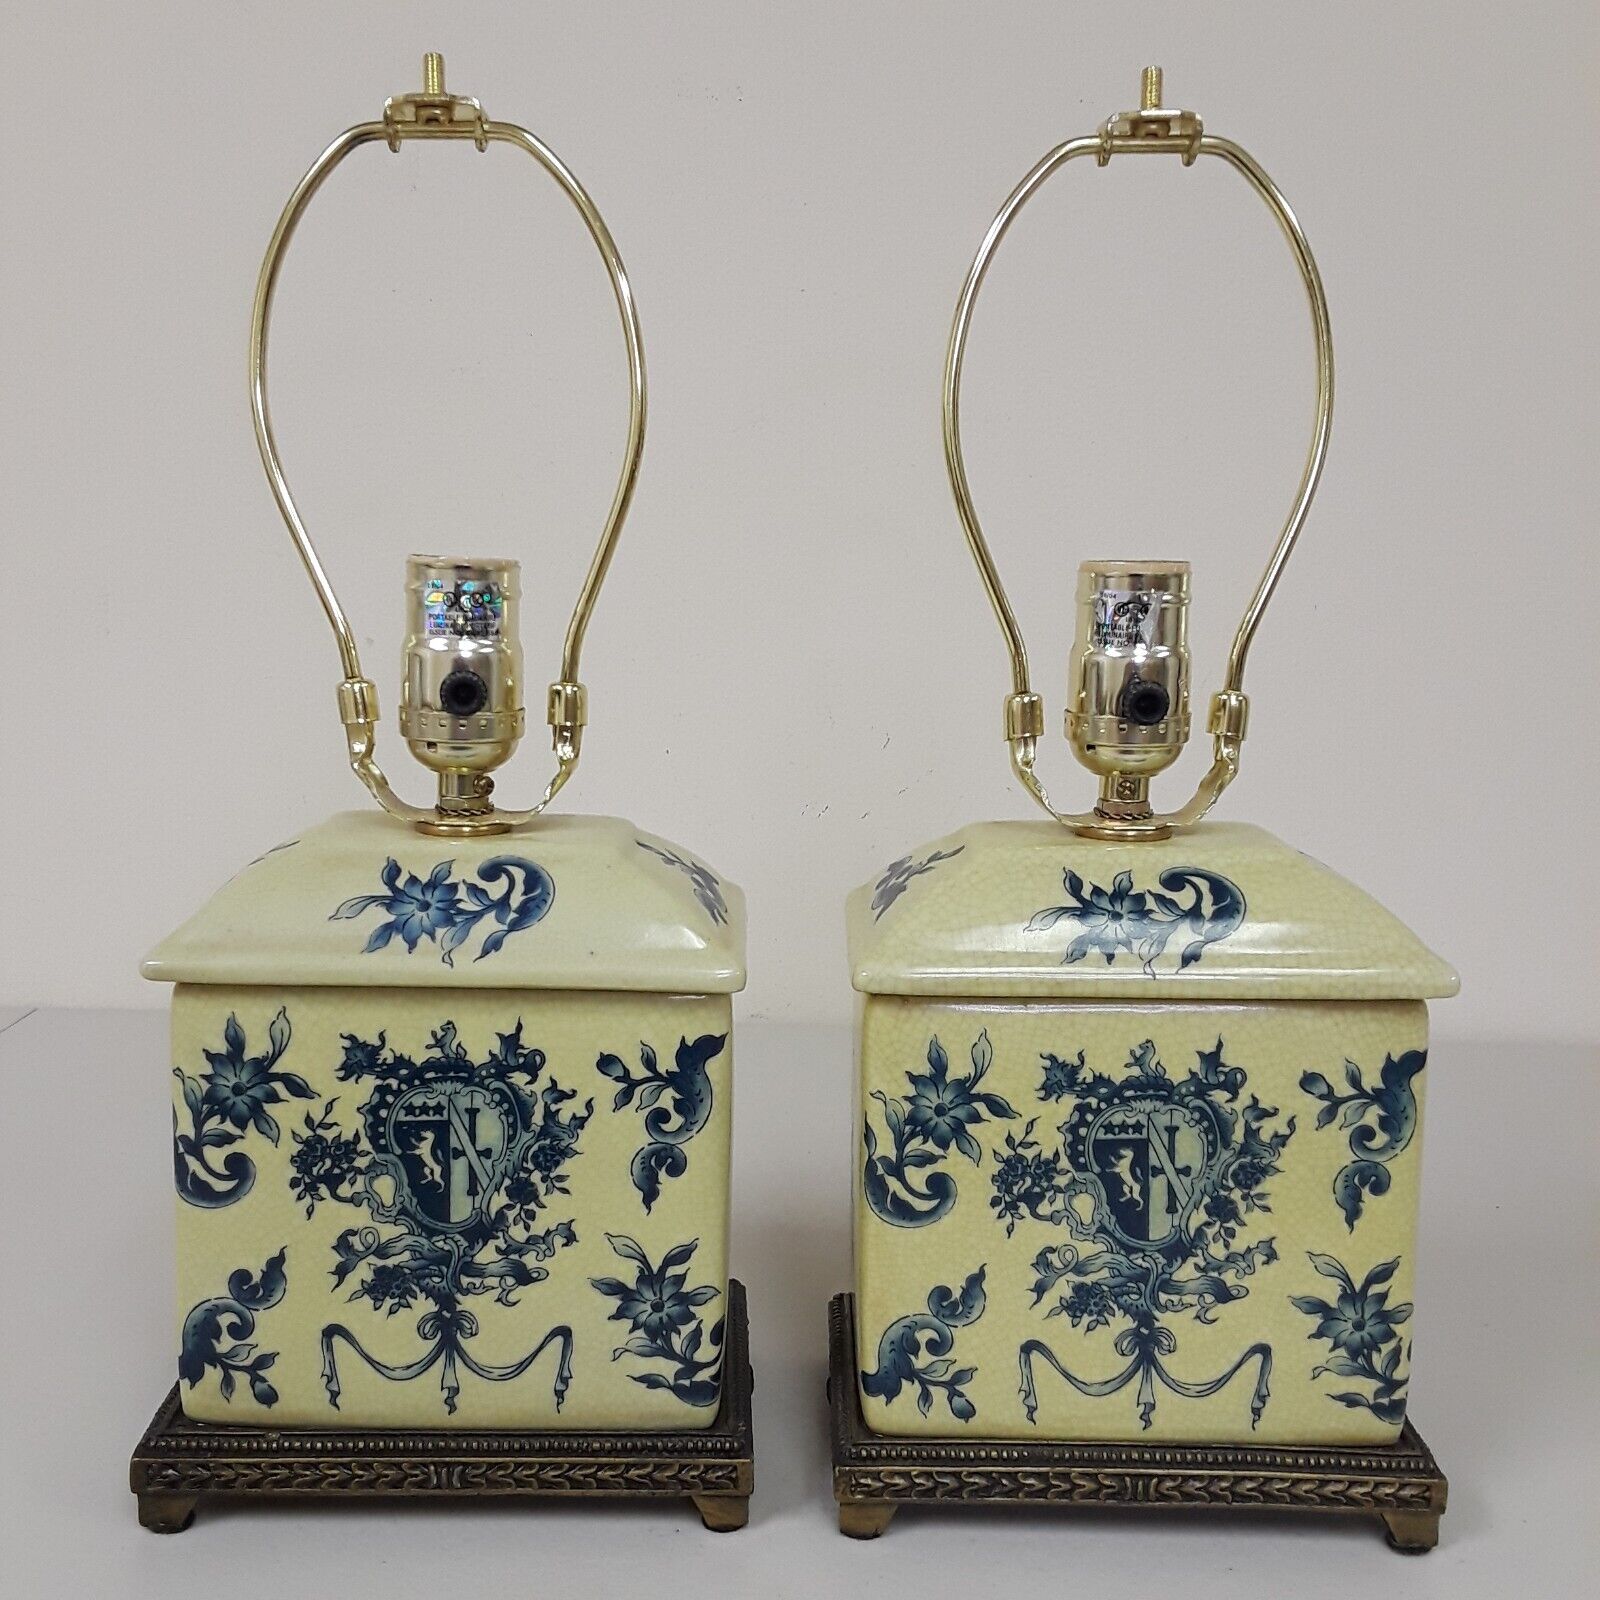 French Provincial Toile Small Table Lamp Pair Pale Yellow & Blue Crest Set of 2